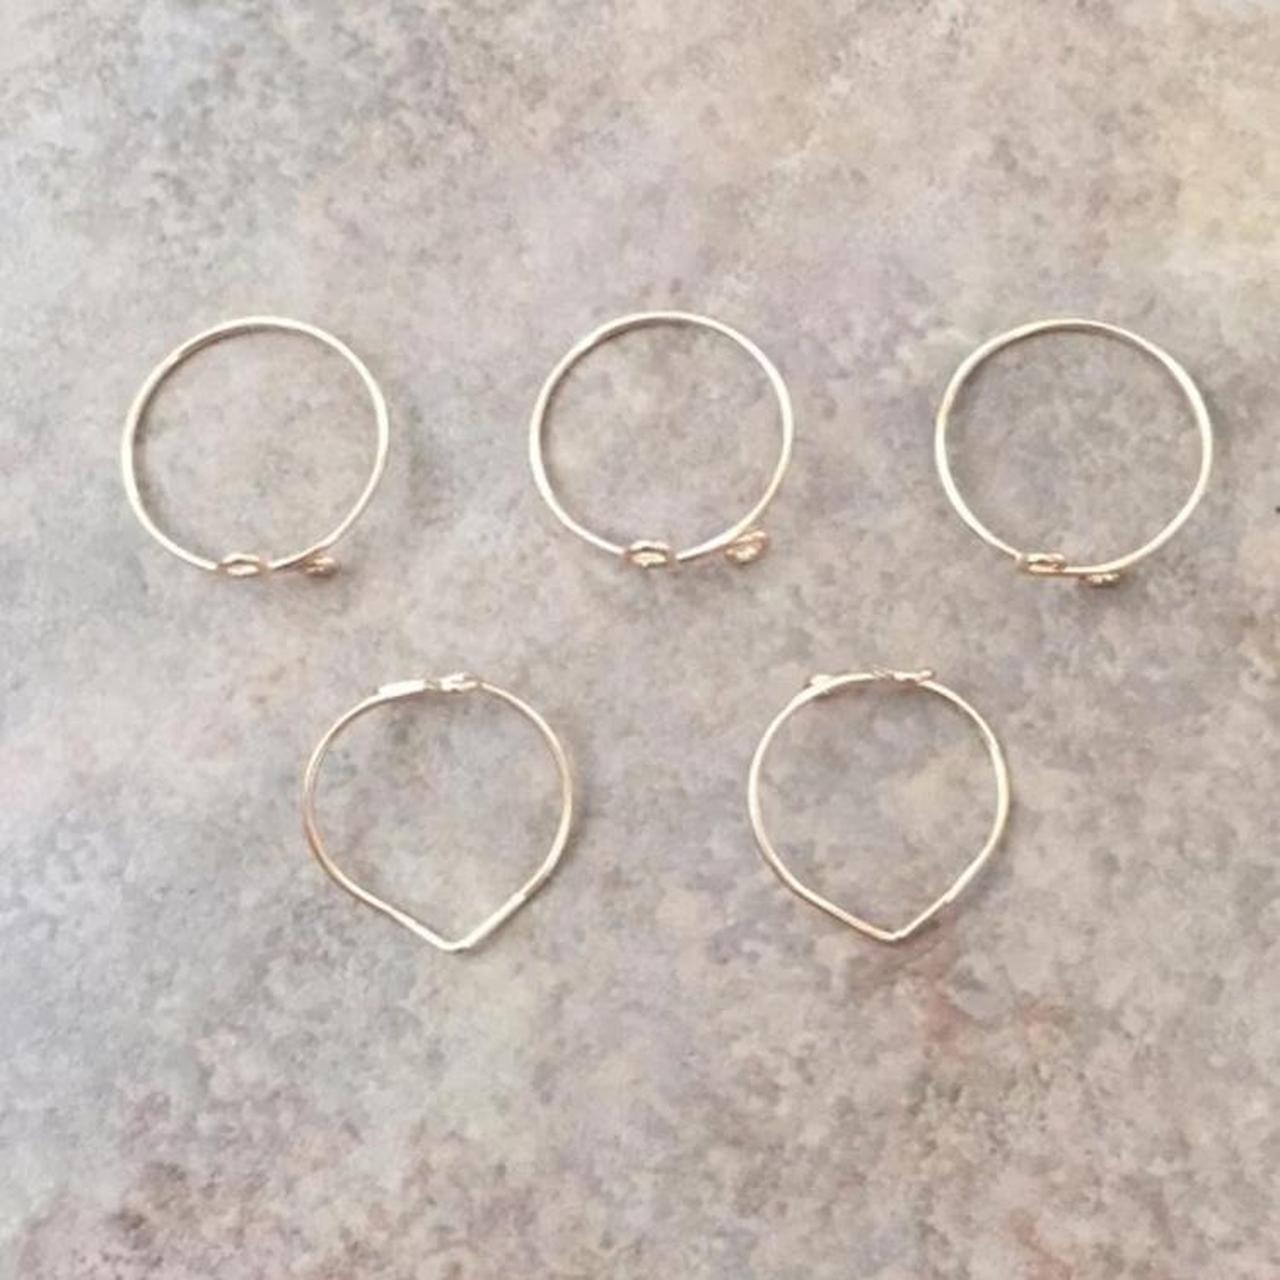 Product Image 2 - 5pcs gold midi rings
Condition: 100%